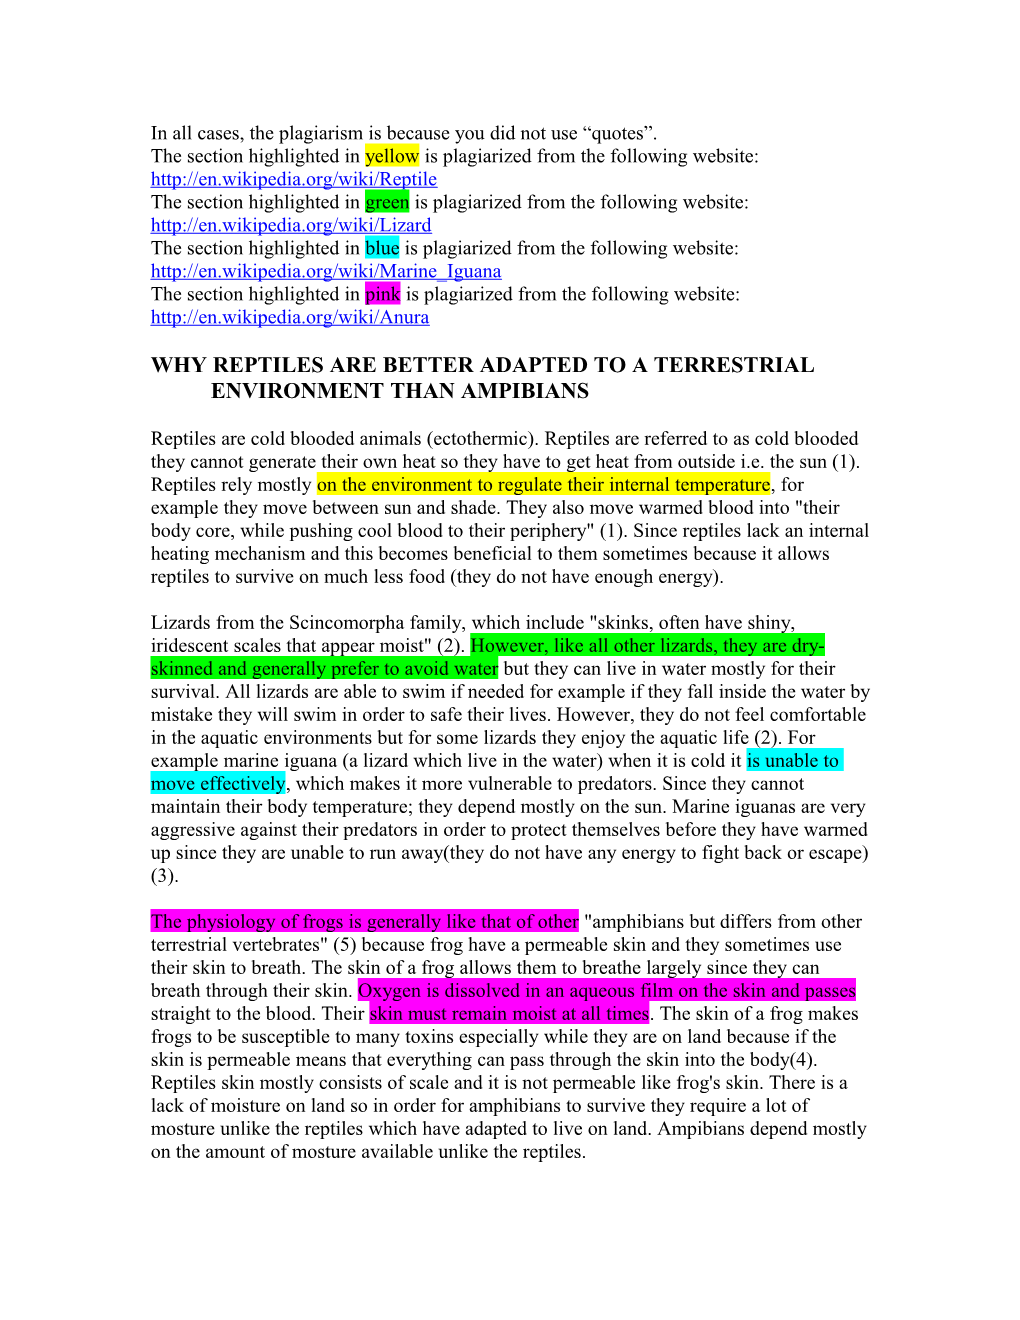 The Section Highlighted in Yellow Is Plagiarized from the Following Website